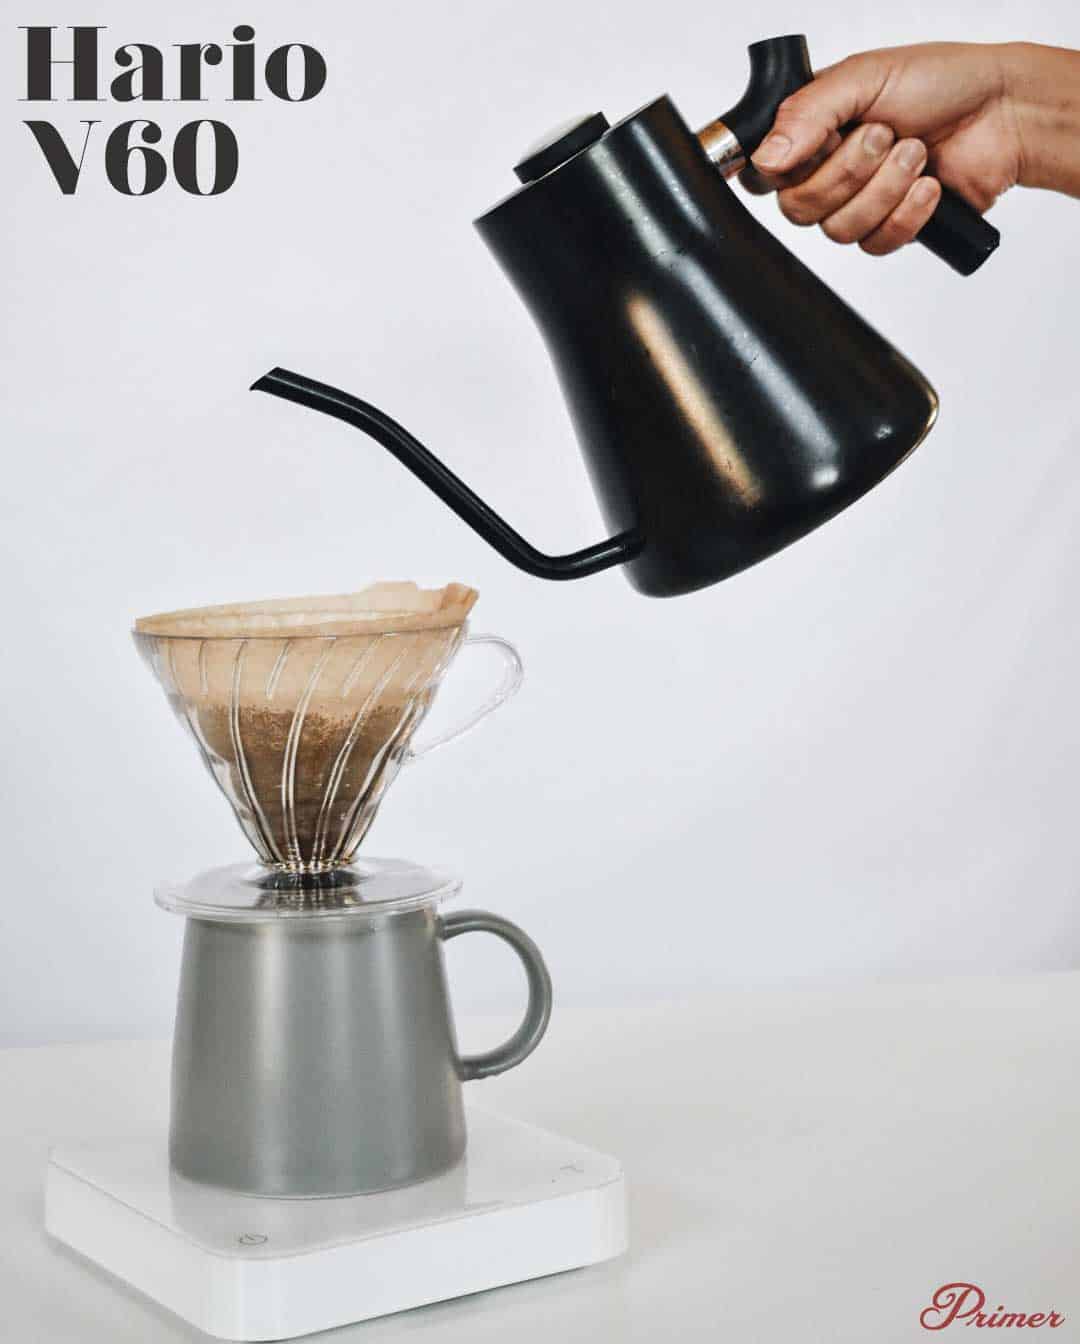 The Differences Between The Hario V60 Kalita Wave And Chemex Pour Over Drippers